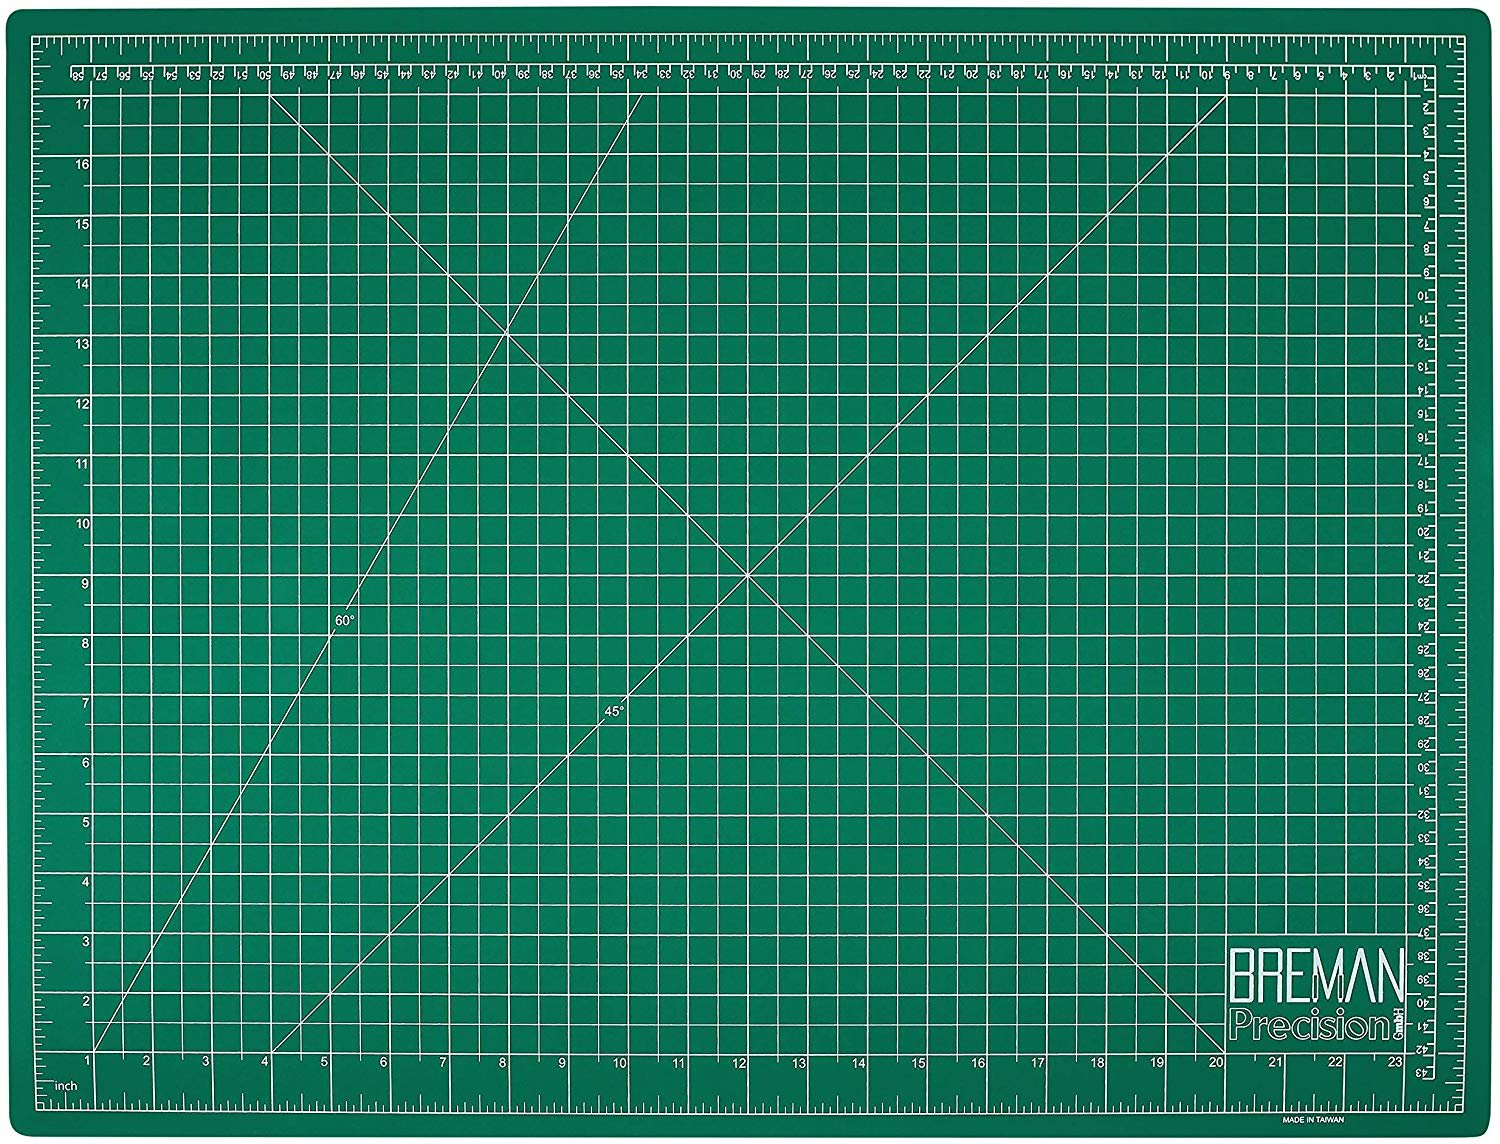 Blue Headley Tools 12 x 18 Inch Self Healing Cutting Mat Durable Non-Slip Rotary Cutting Mat Double Sided 5-Ply Gridded A3 Cutting Board for Craft Sewing Quilting Scrapbooking Project Fabric 